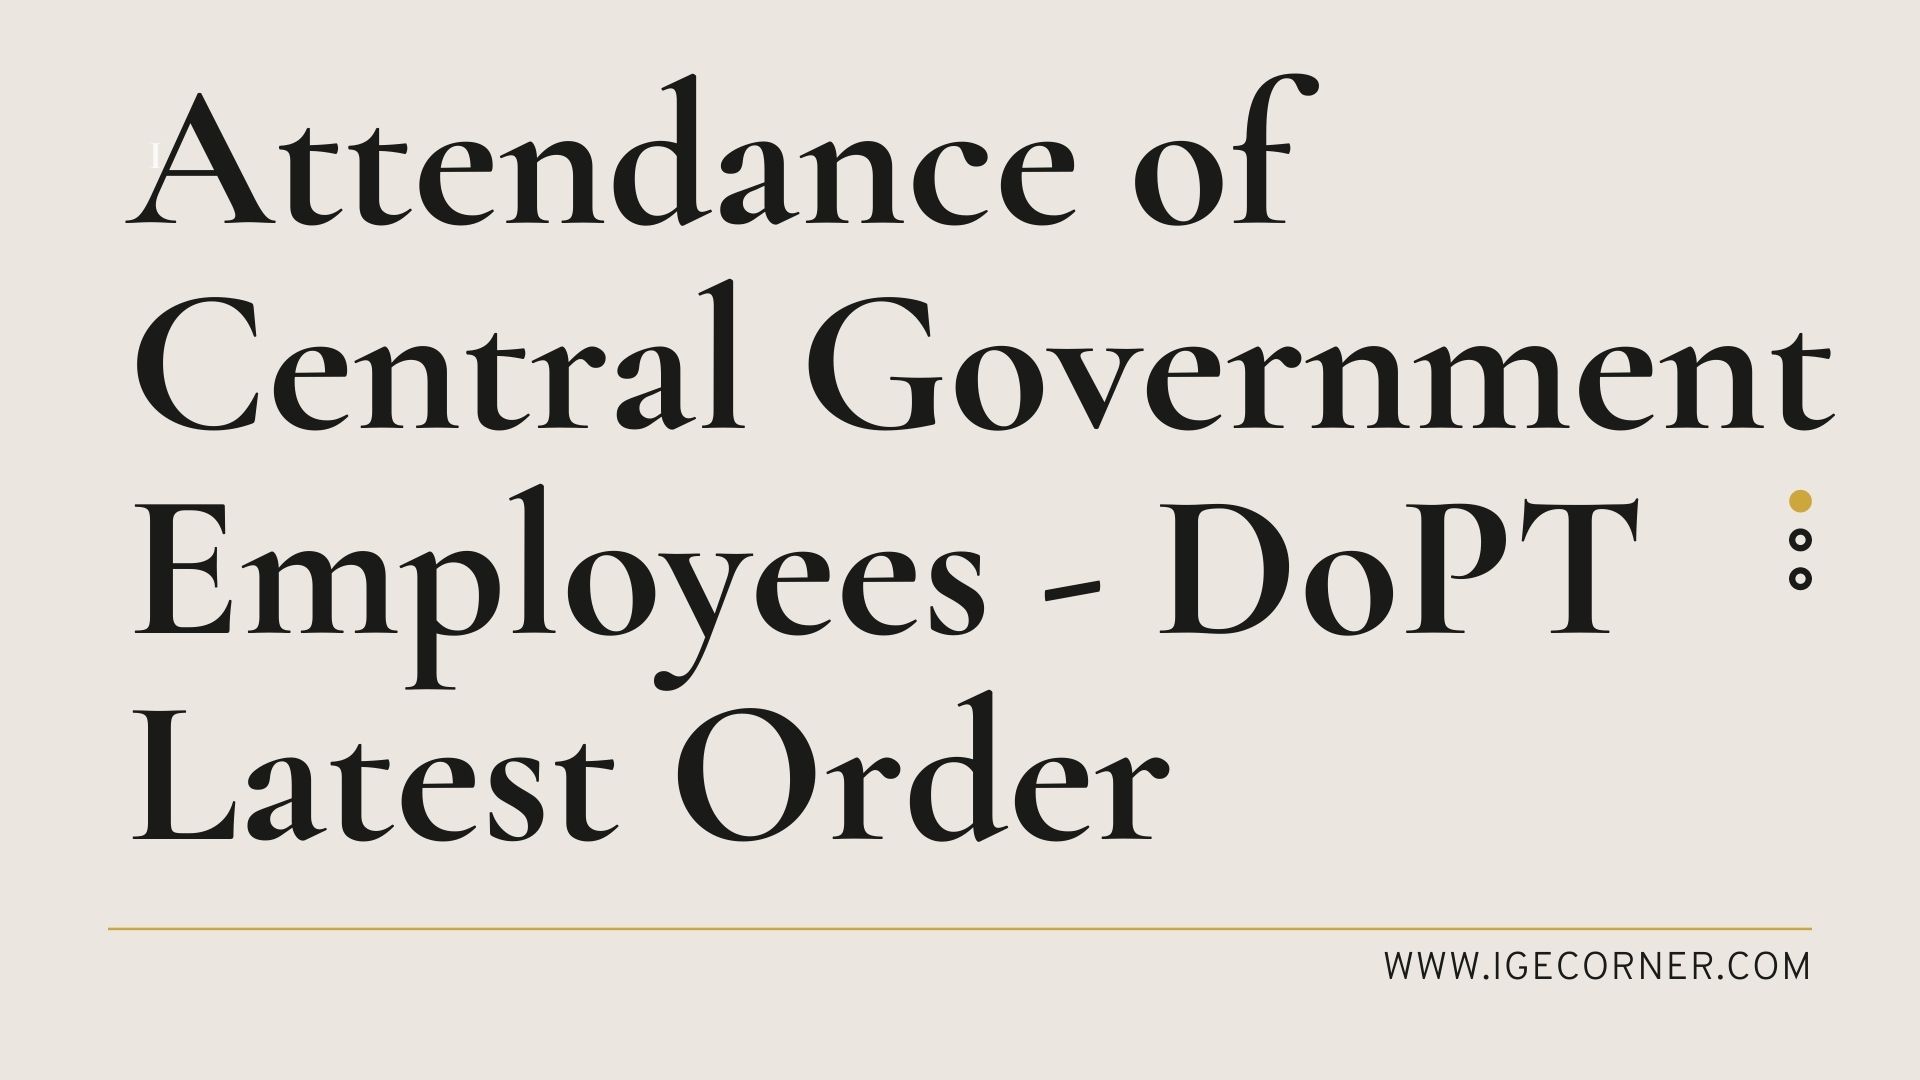 Attendance of Central Government Employees DoPT Latest Order